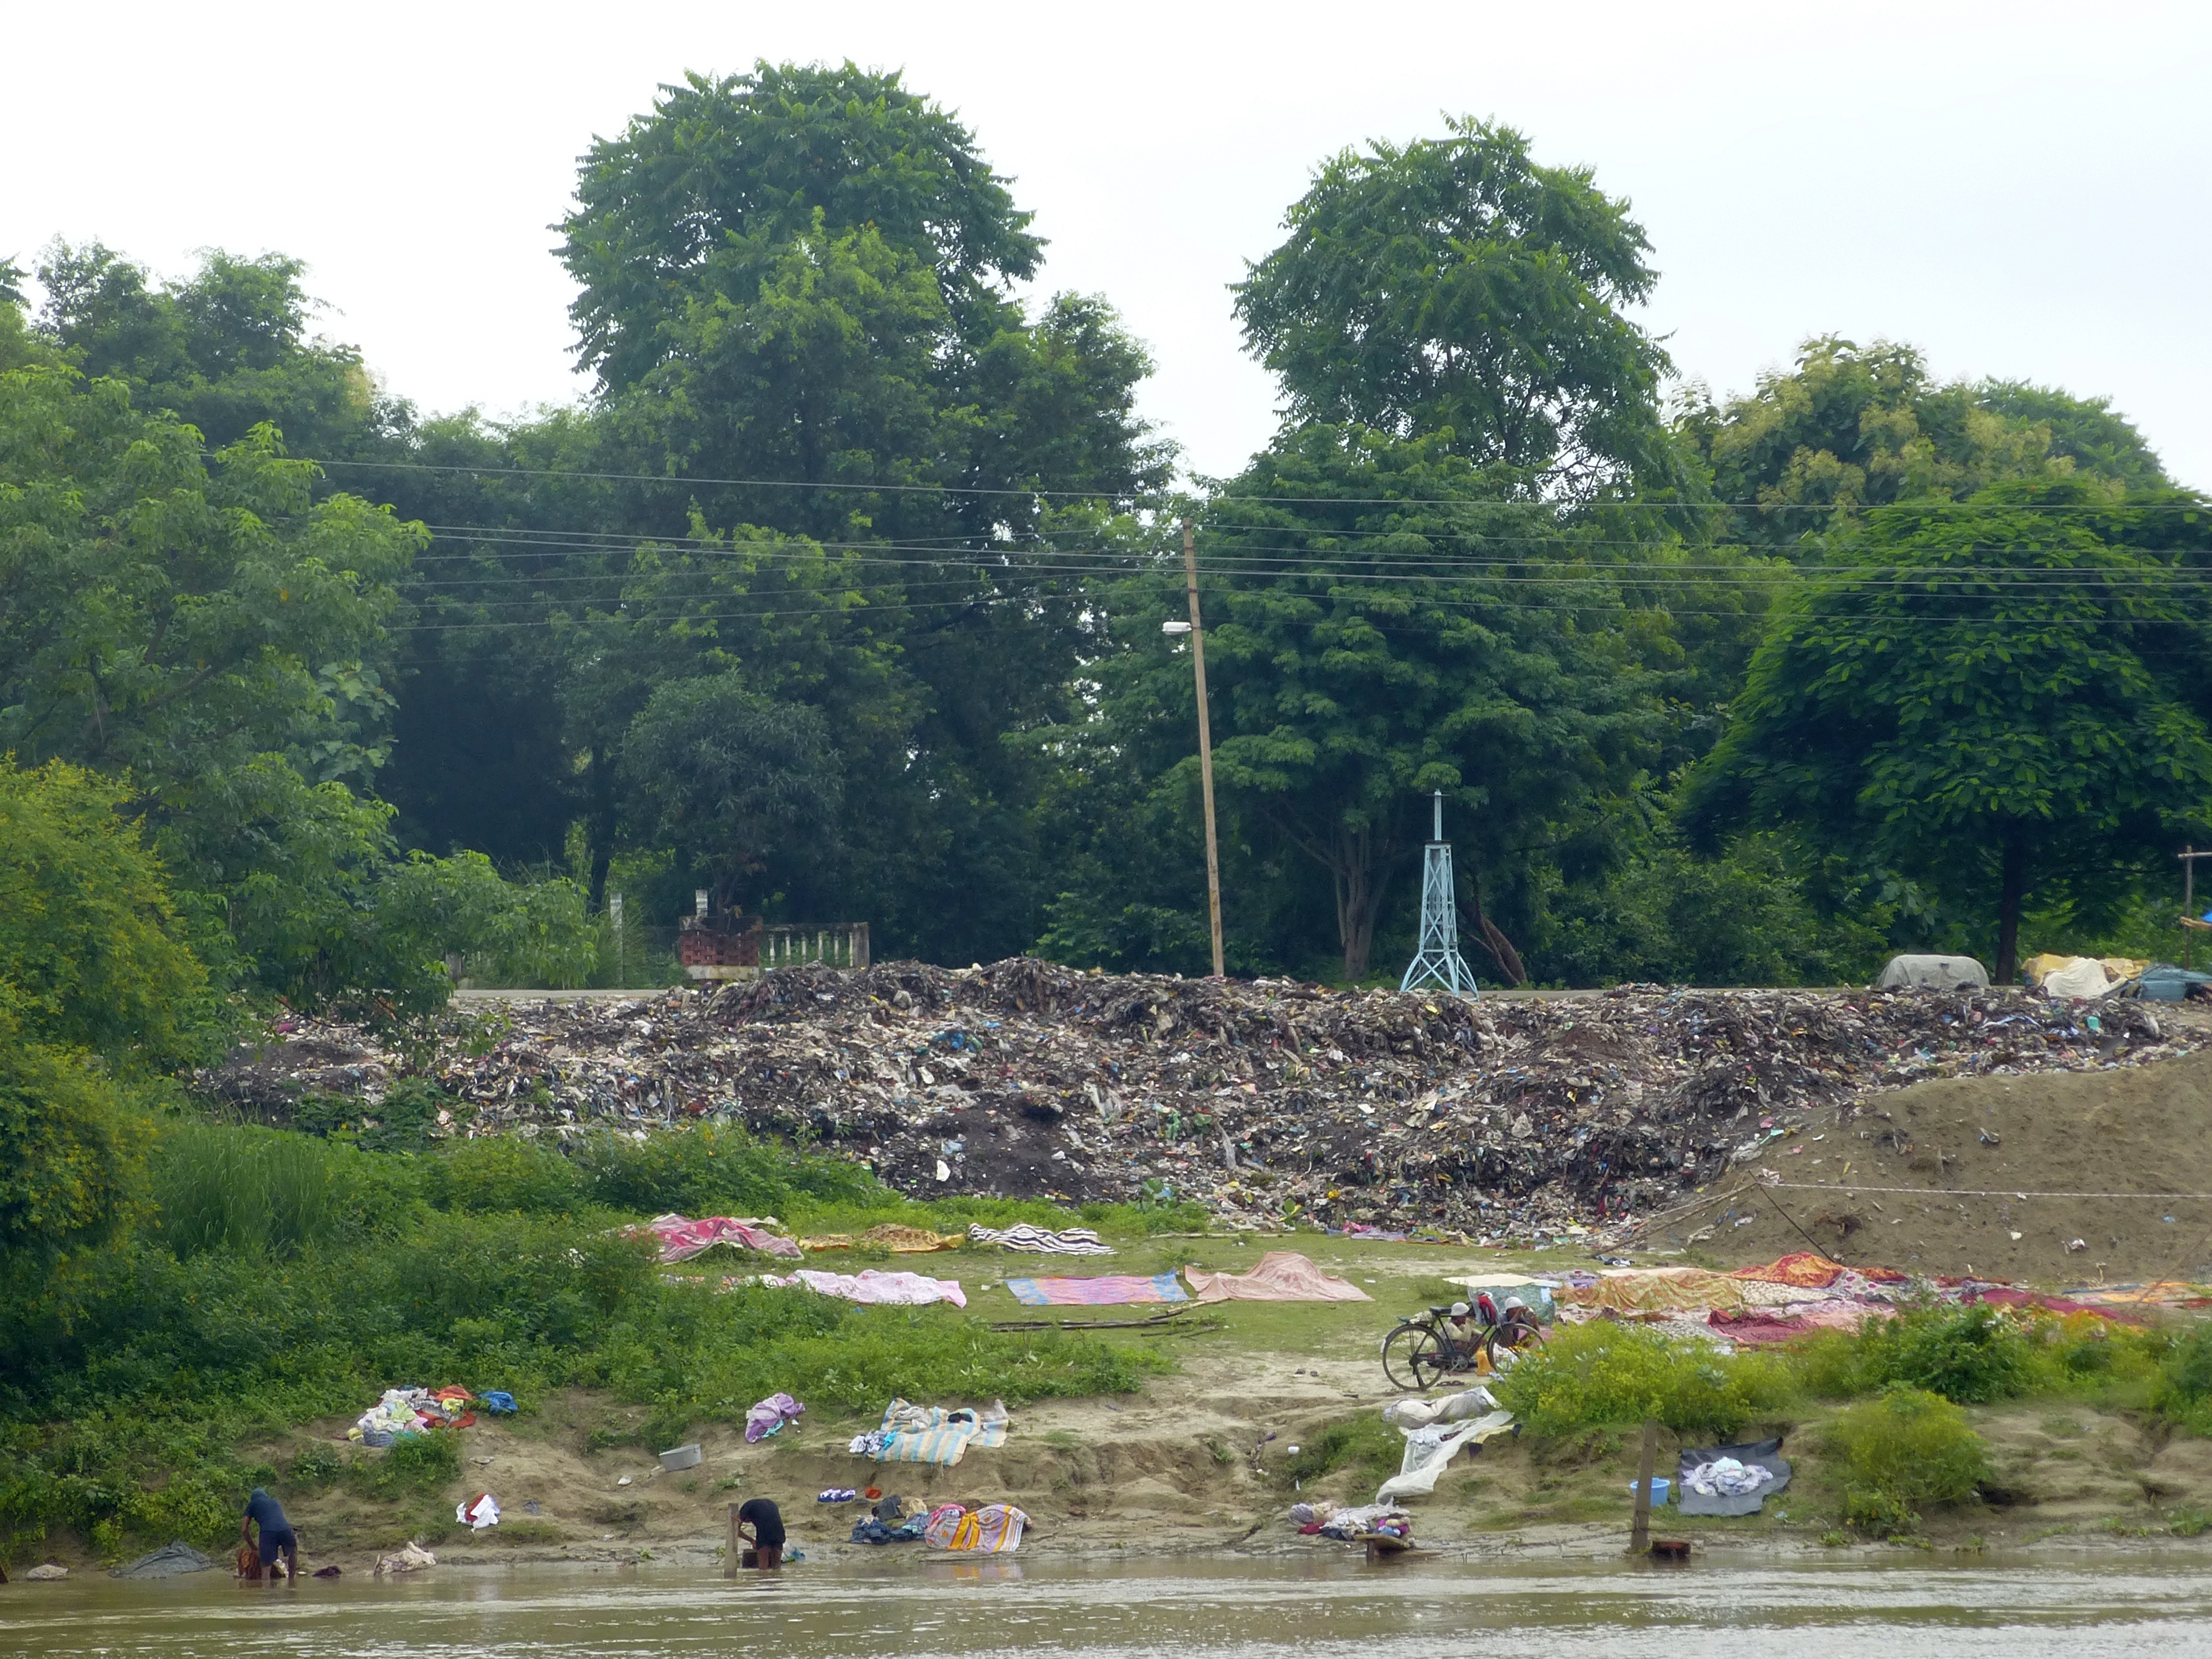 Piles of garbage next to a flowing river where people are washing clothes.